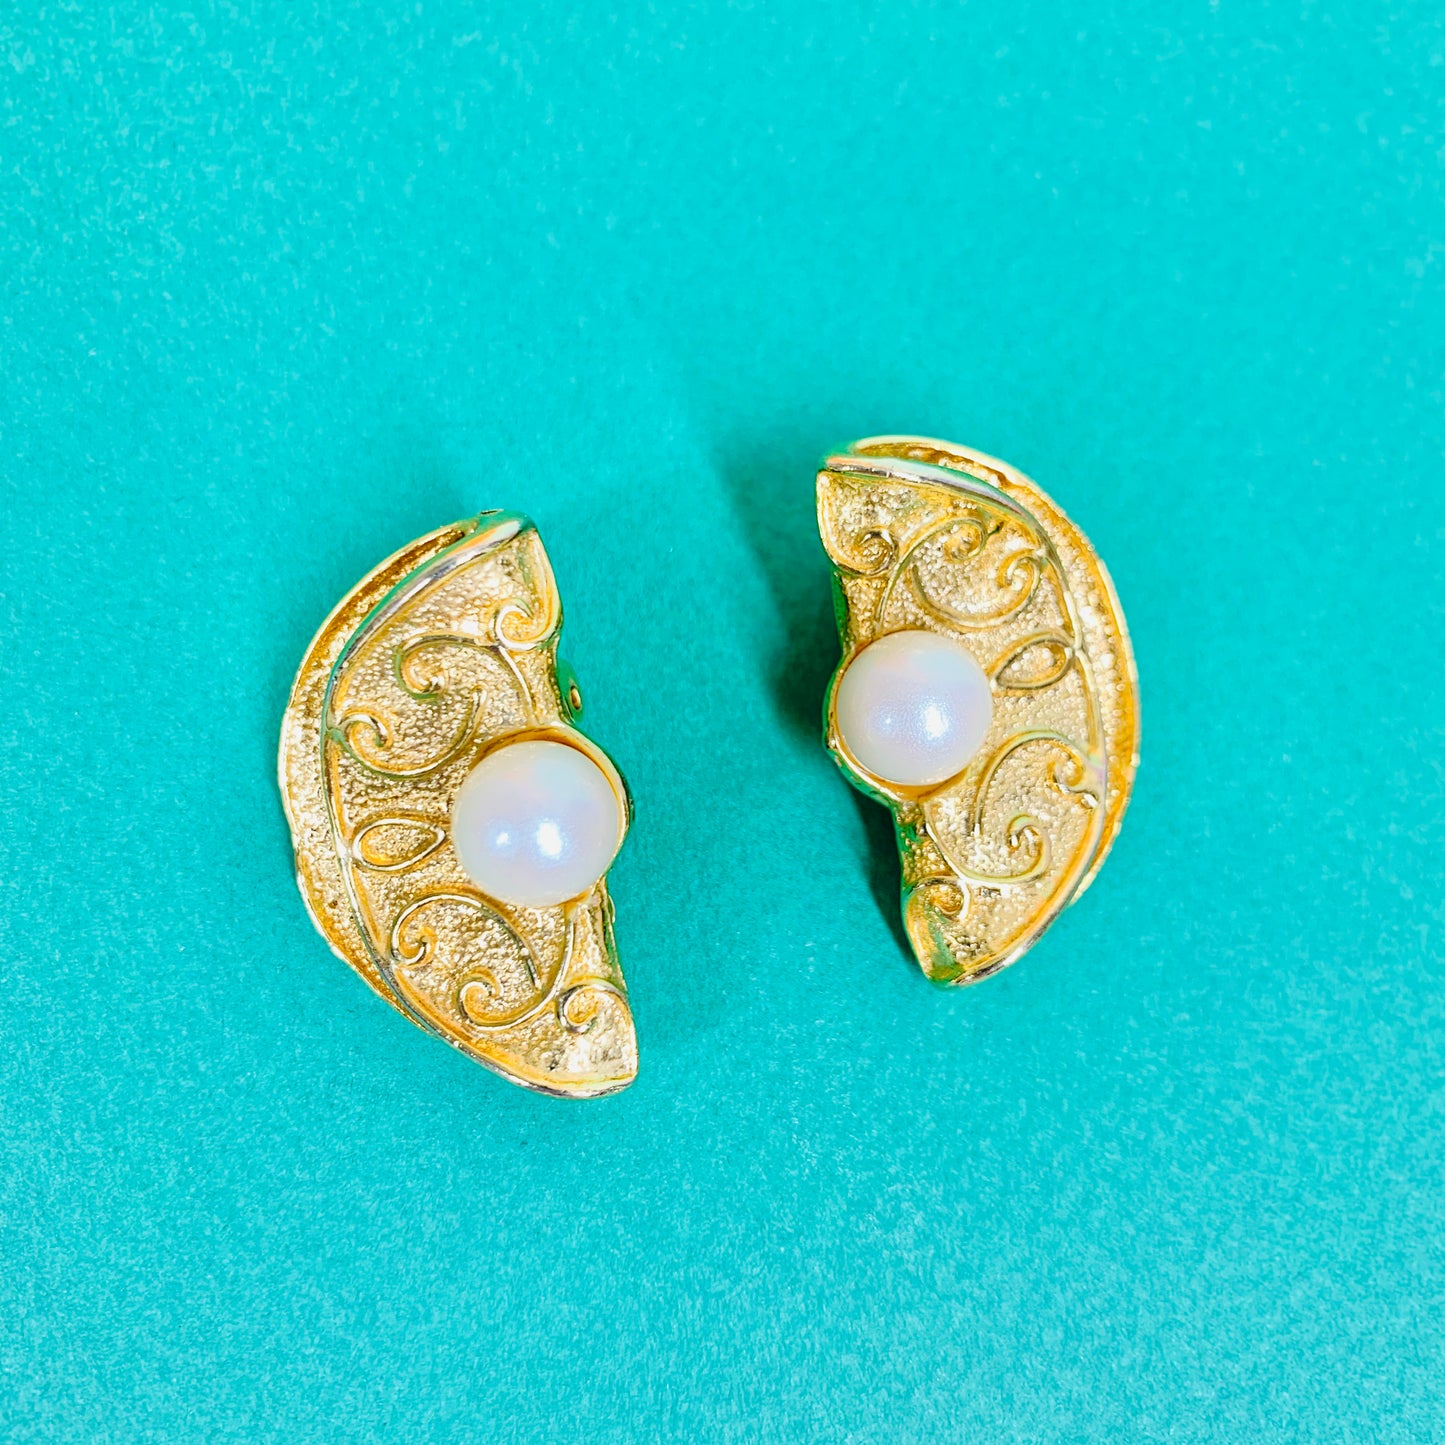 Extremely rare 1970s Egyptian revival fan stud earrings with pearl